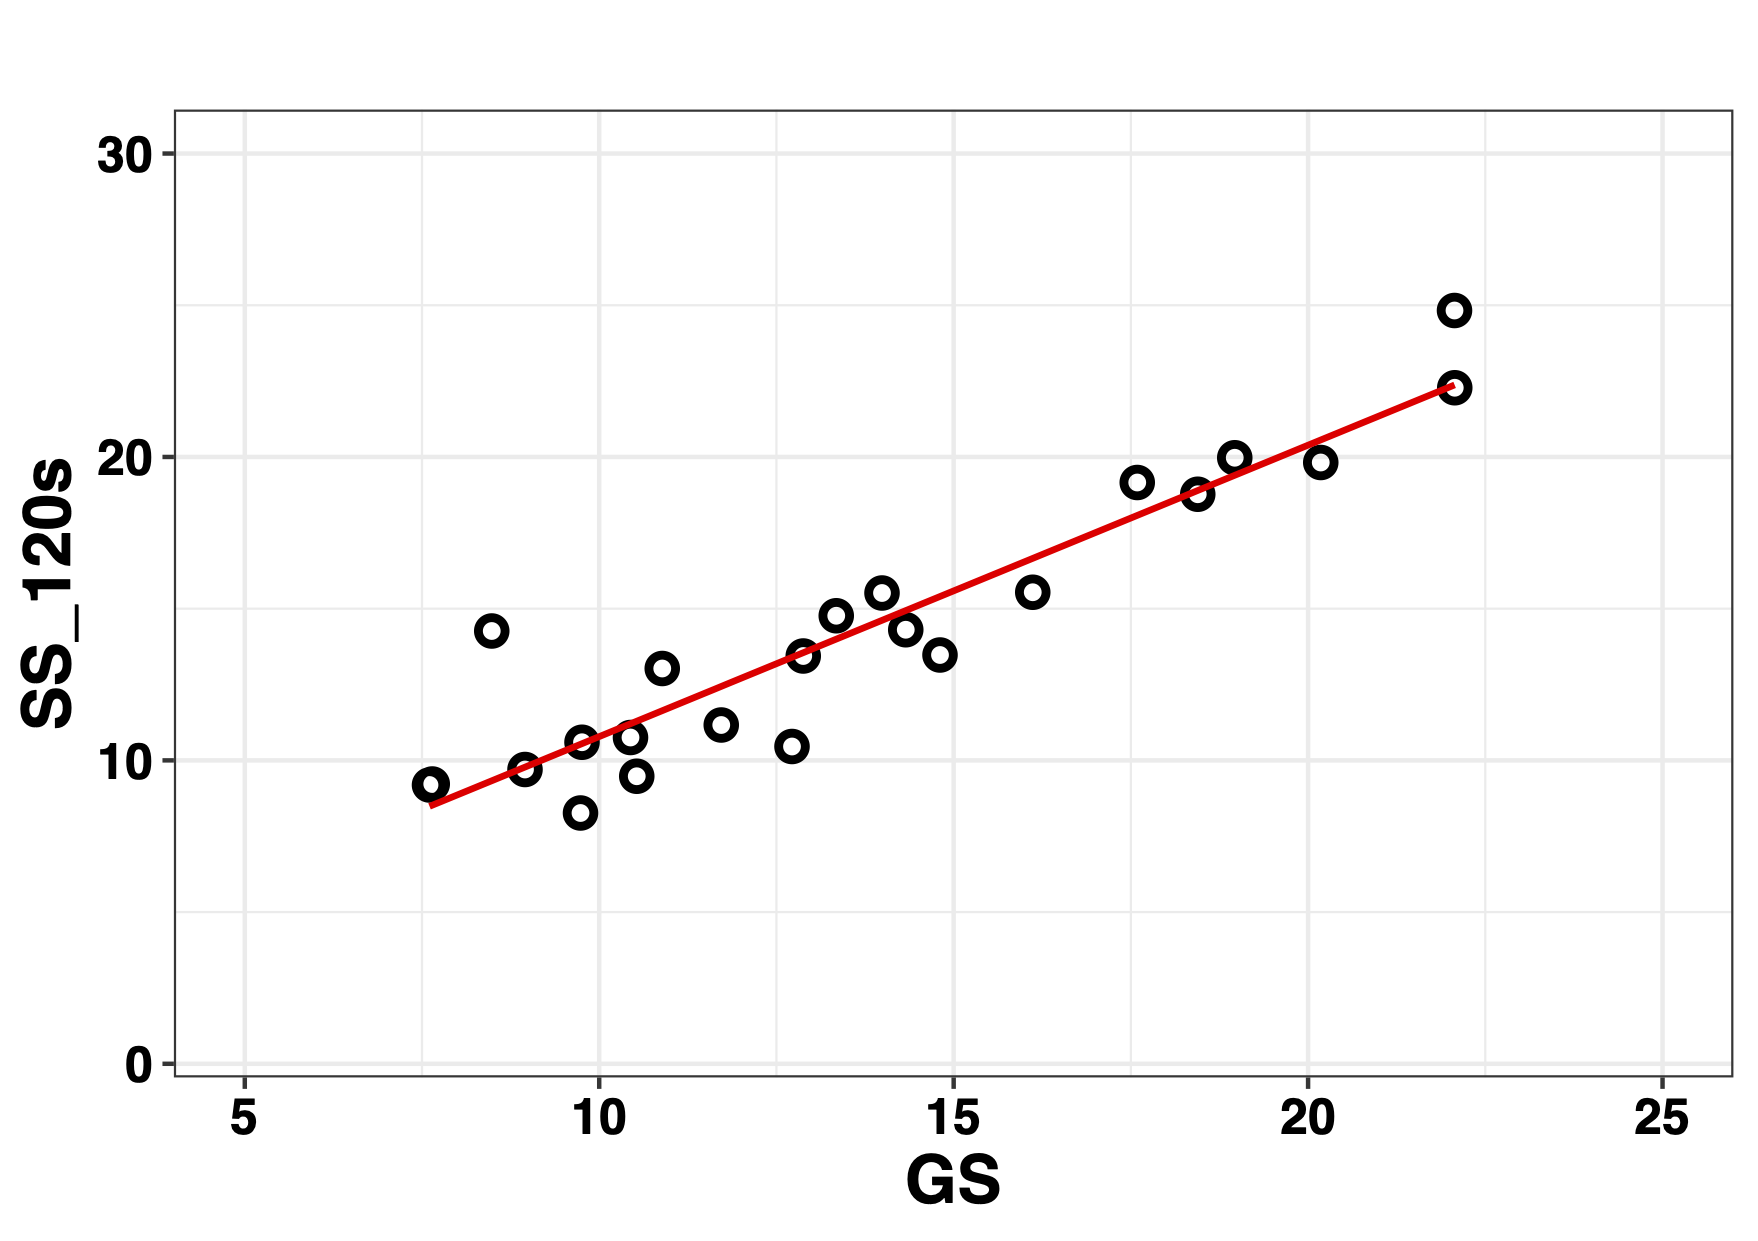 Correlation analysis of GS vs SS 120 s of the SS index, rho = 0.90, p = 3.28e-06.